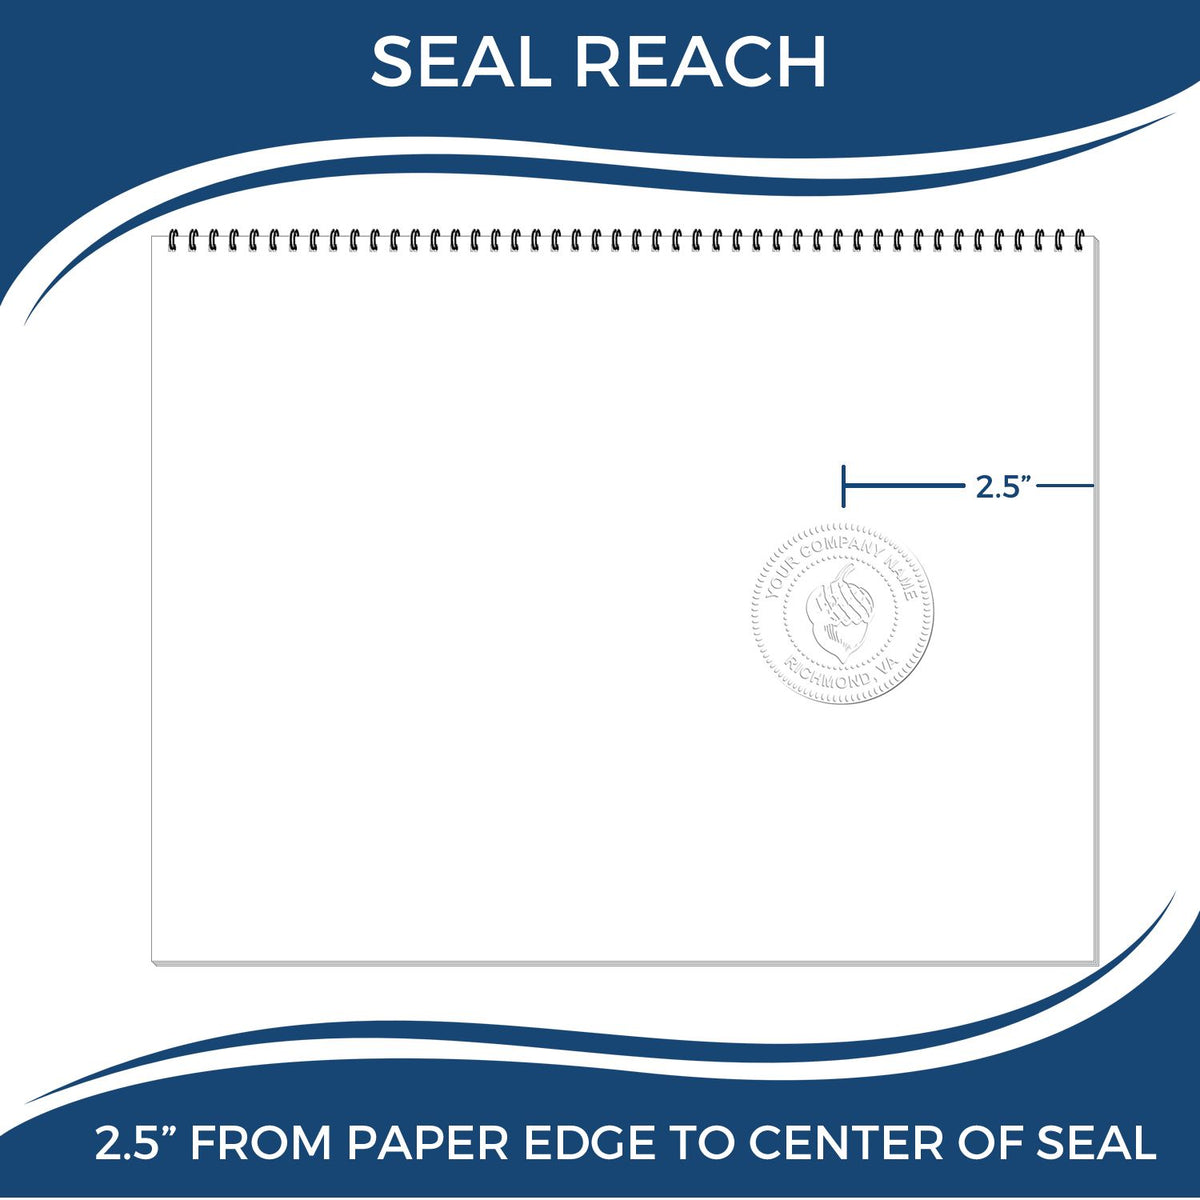 An infographic showing the seal reach which is represented by a ruler and a miniature seal image of the Heavy Duty Cast Iron Nevada Geologist Seal Embosser